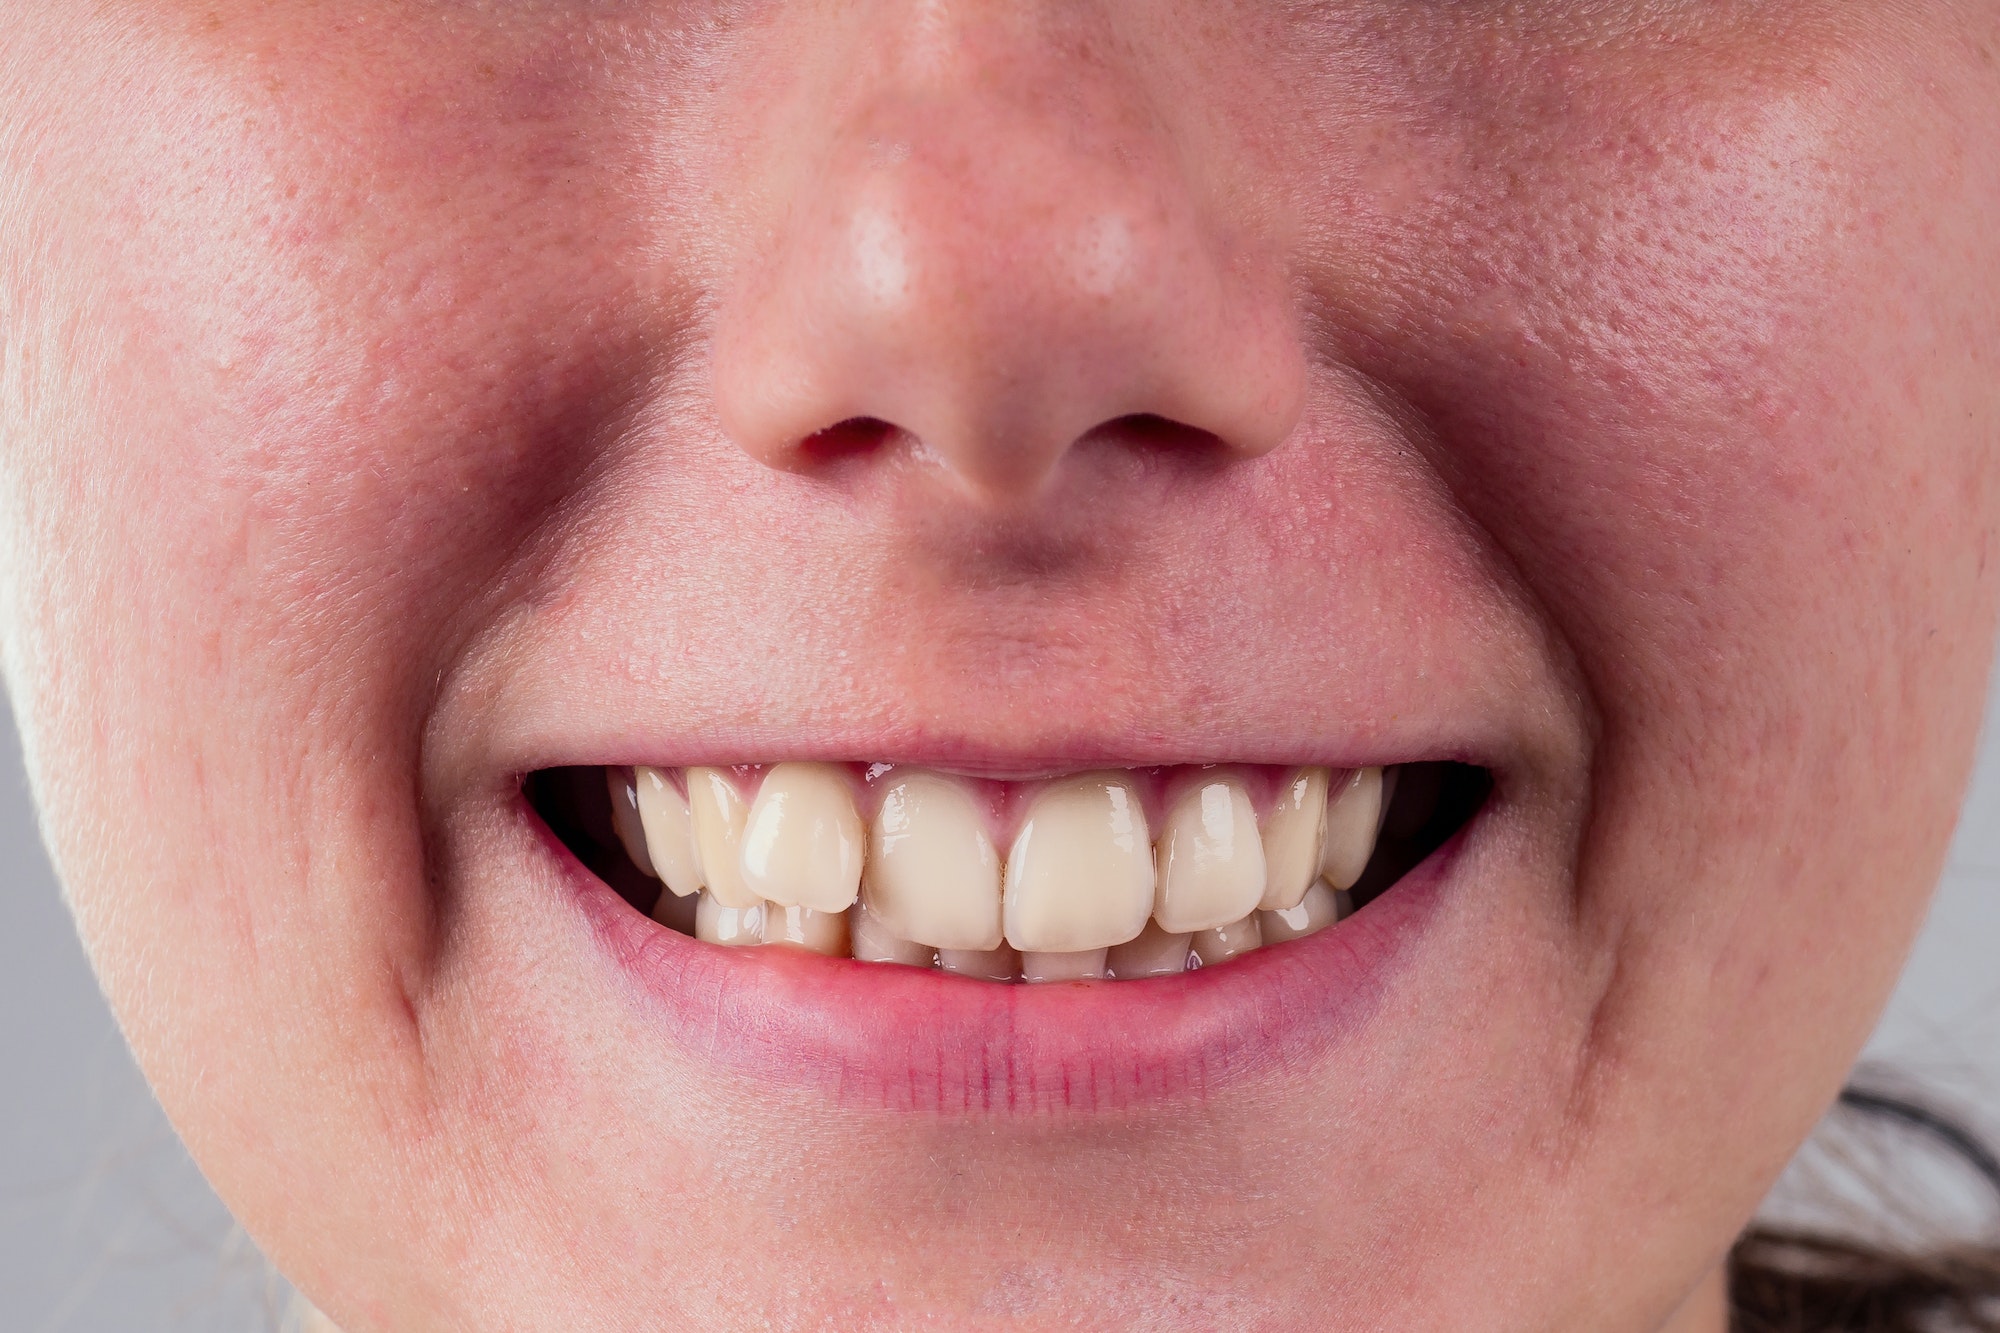 white smile with curvature tooth of young woman on whitw background in studio